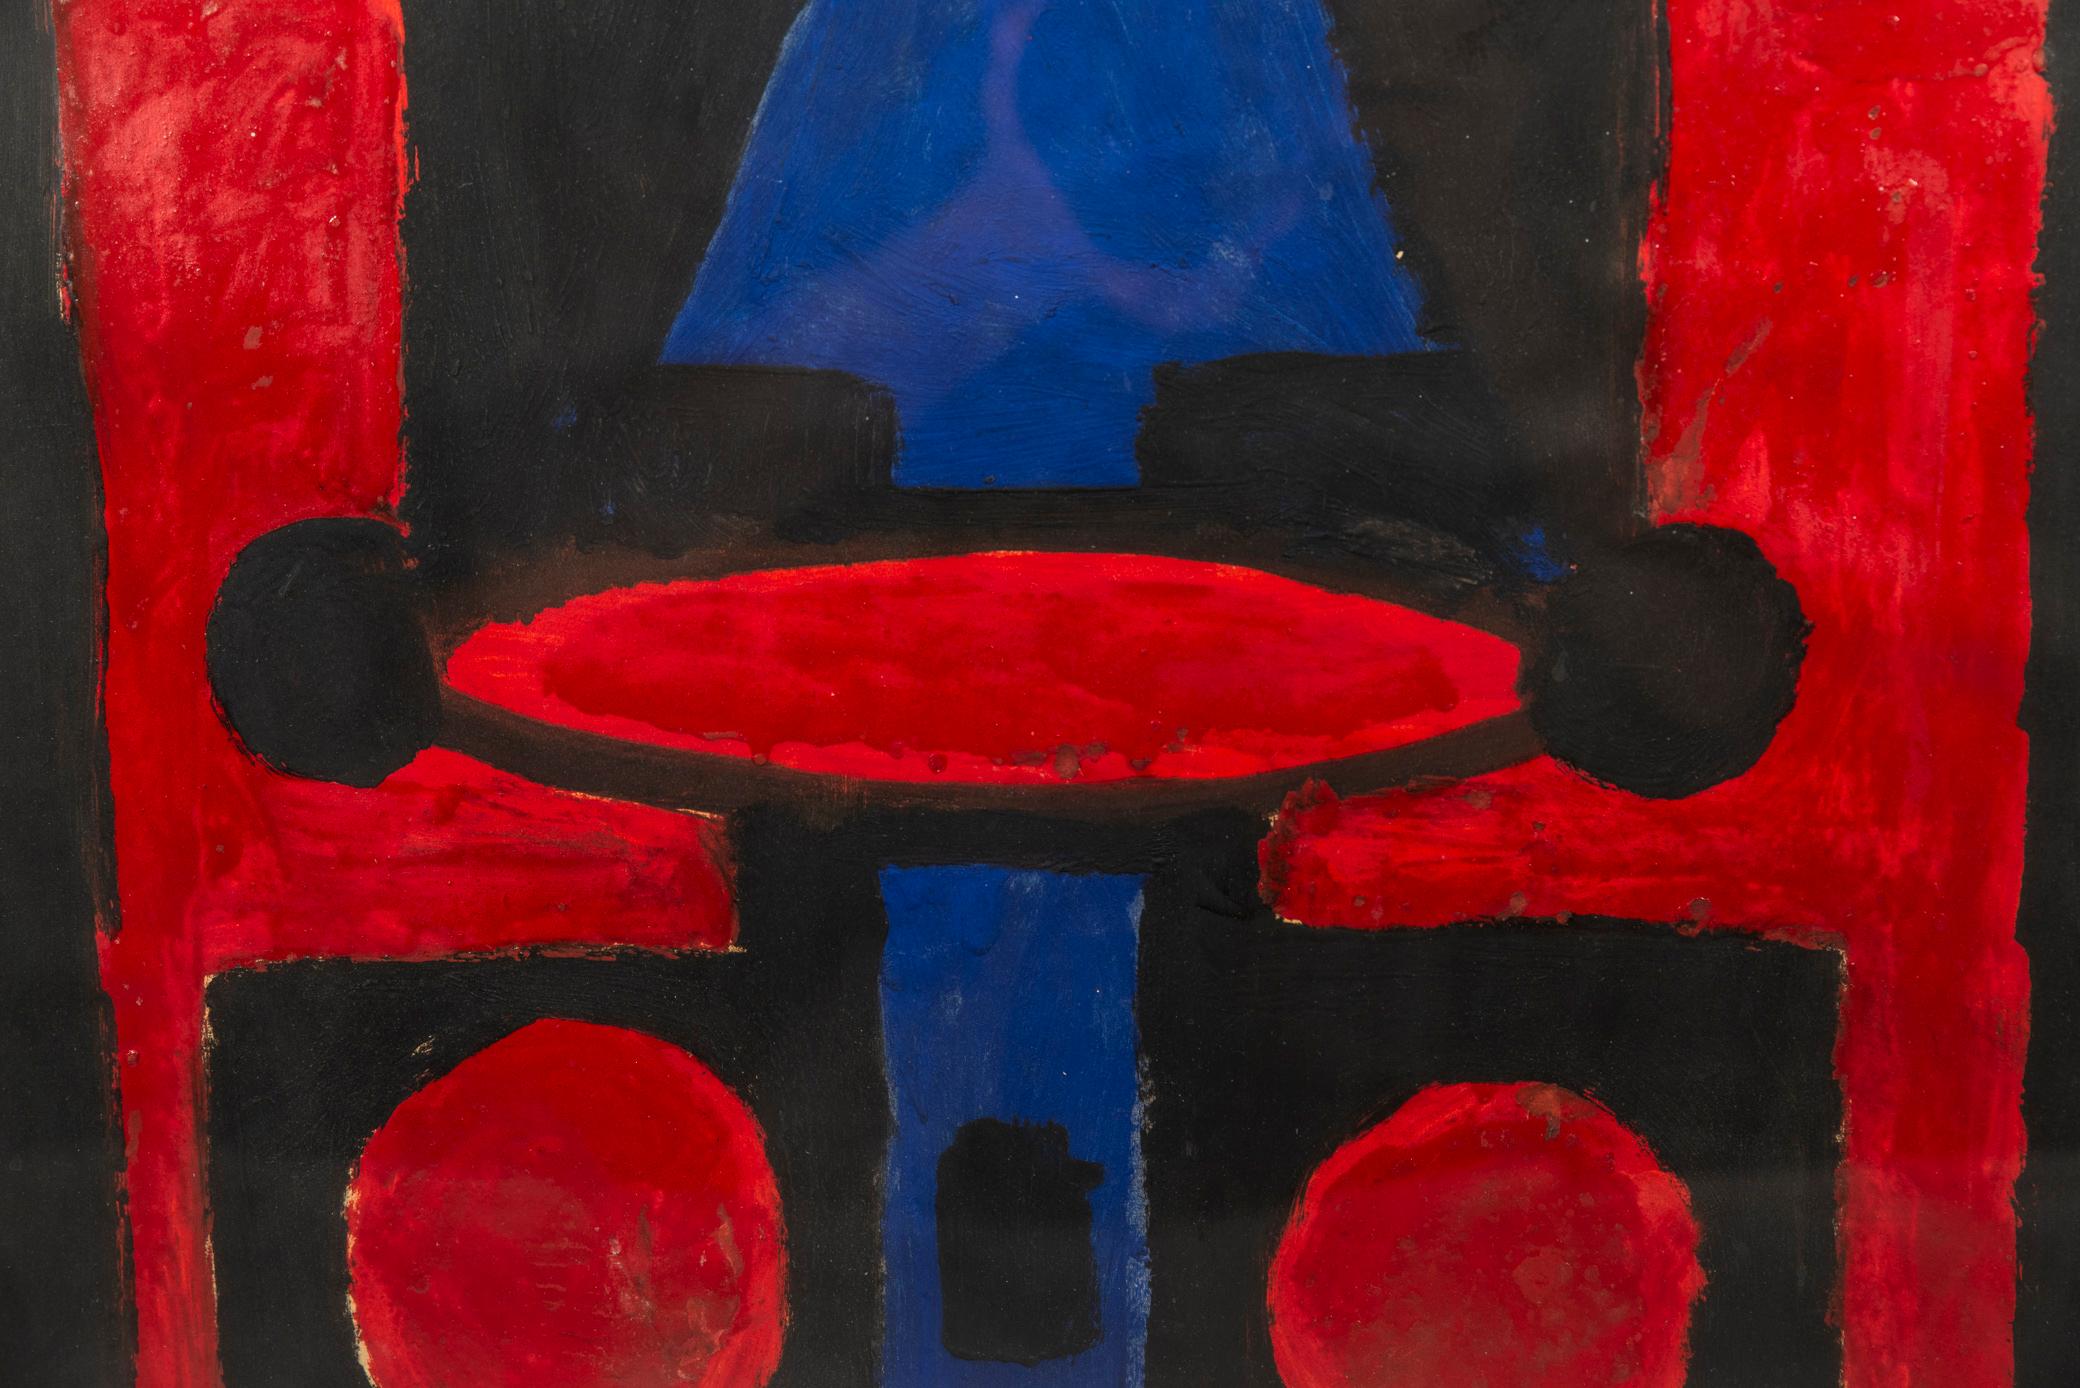 Albert Chubac, Painting, Mixed-Media on Paper, France, circa 1965 For Sale 2